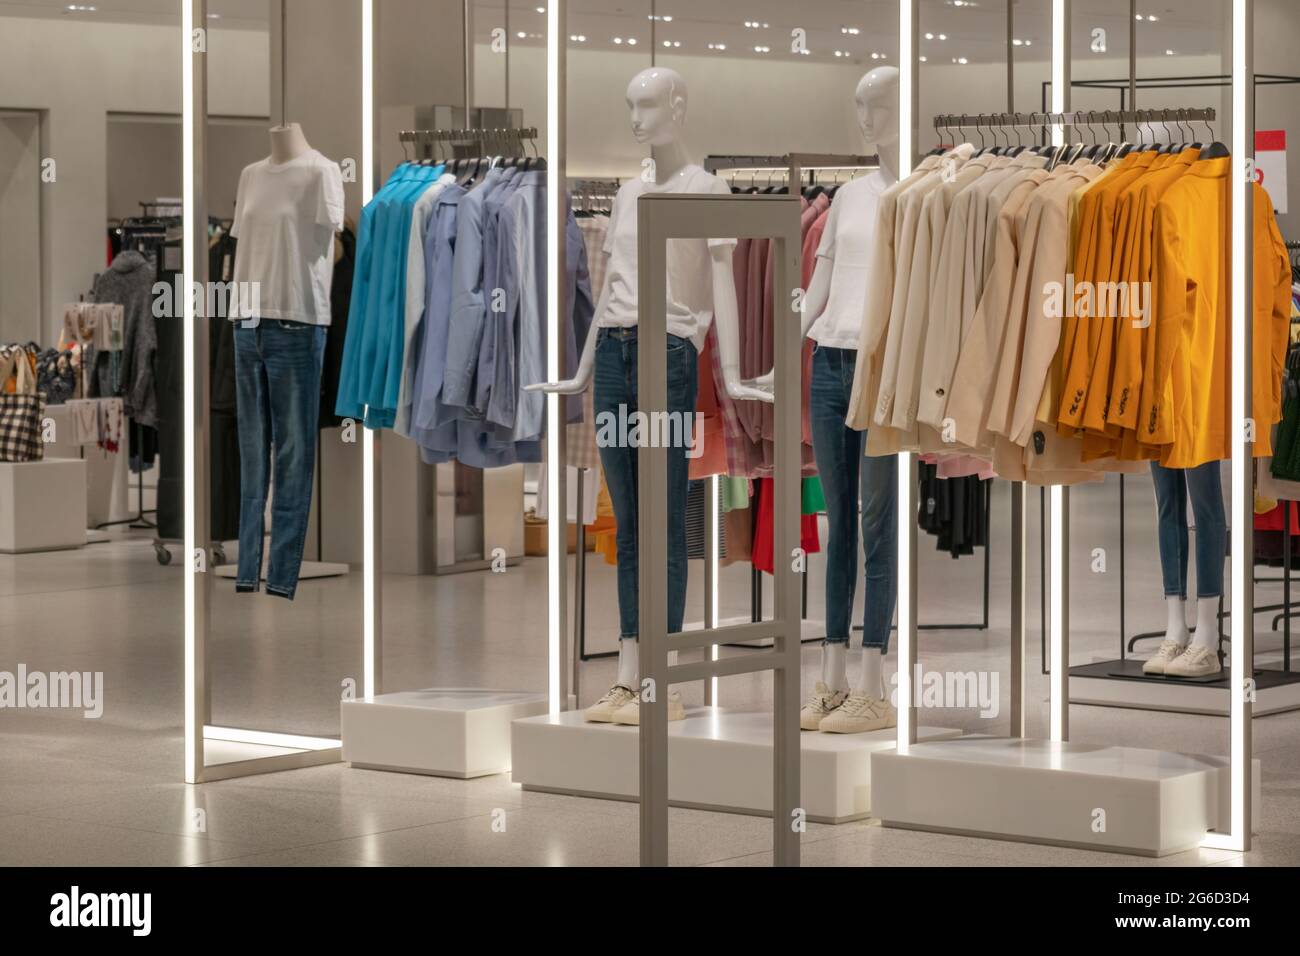 Modern fashionable brand interior of clothing store inside shopping ...